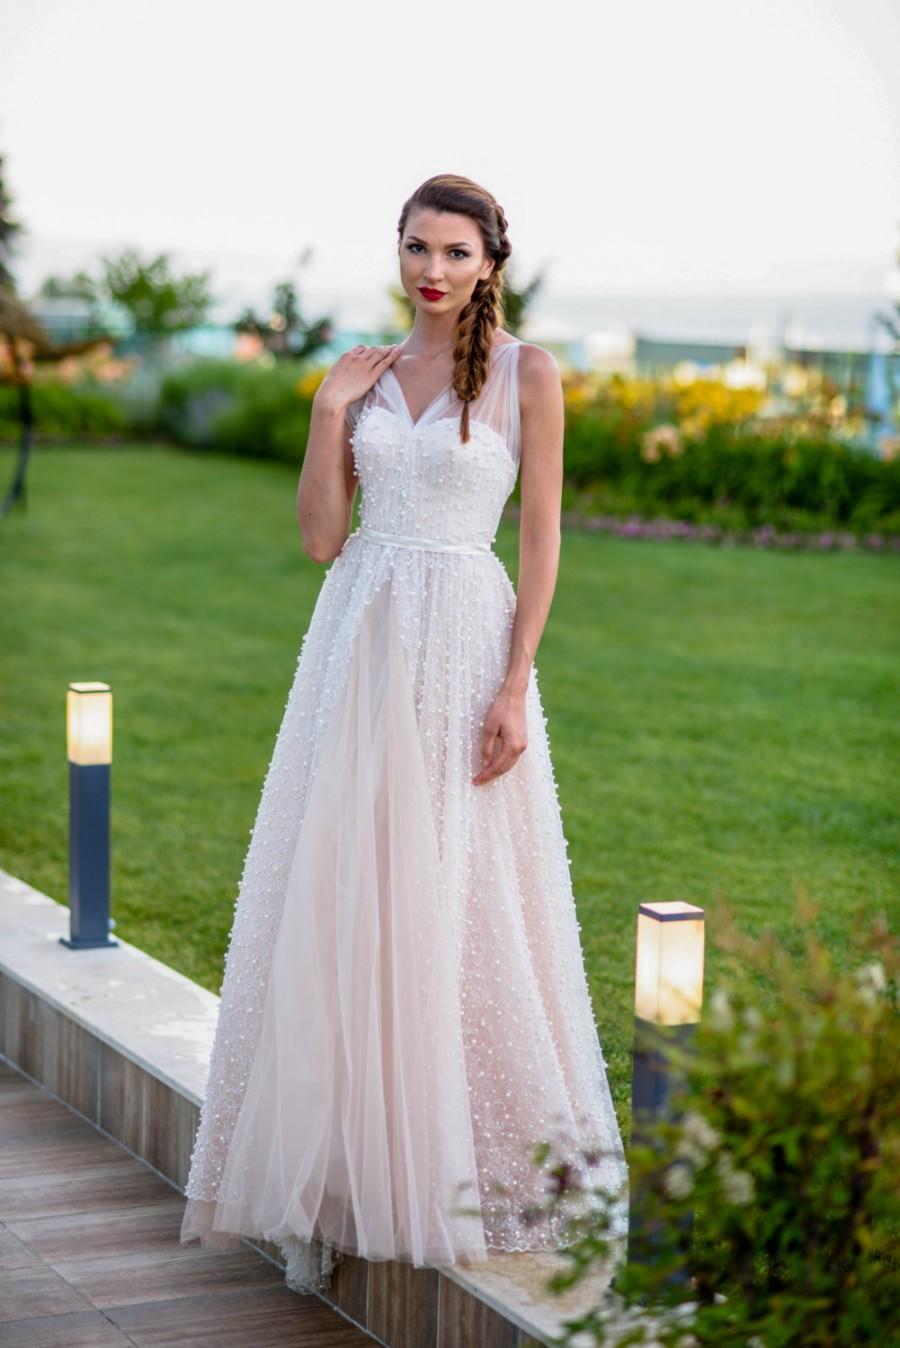 Wedding - Chic dress Prom dress Princess dress in pale pink Tulle dress Romantic gown Boho dress Formal gown Long gown Cocktail dress Sleeveless dress